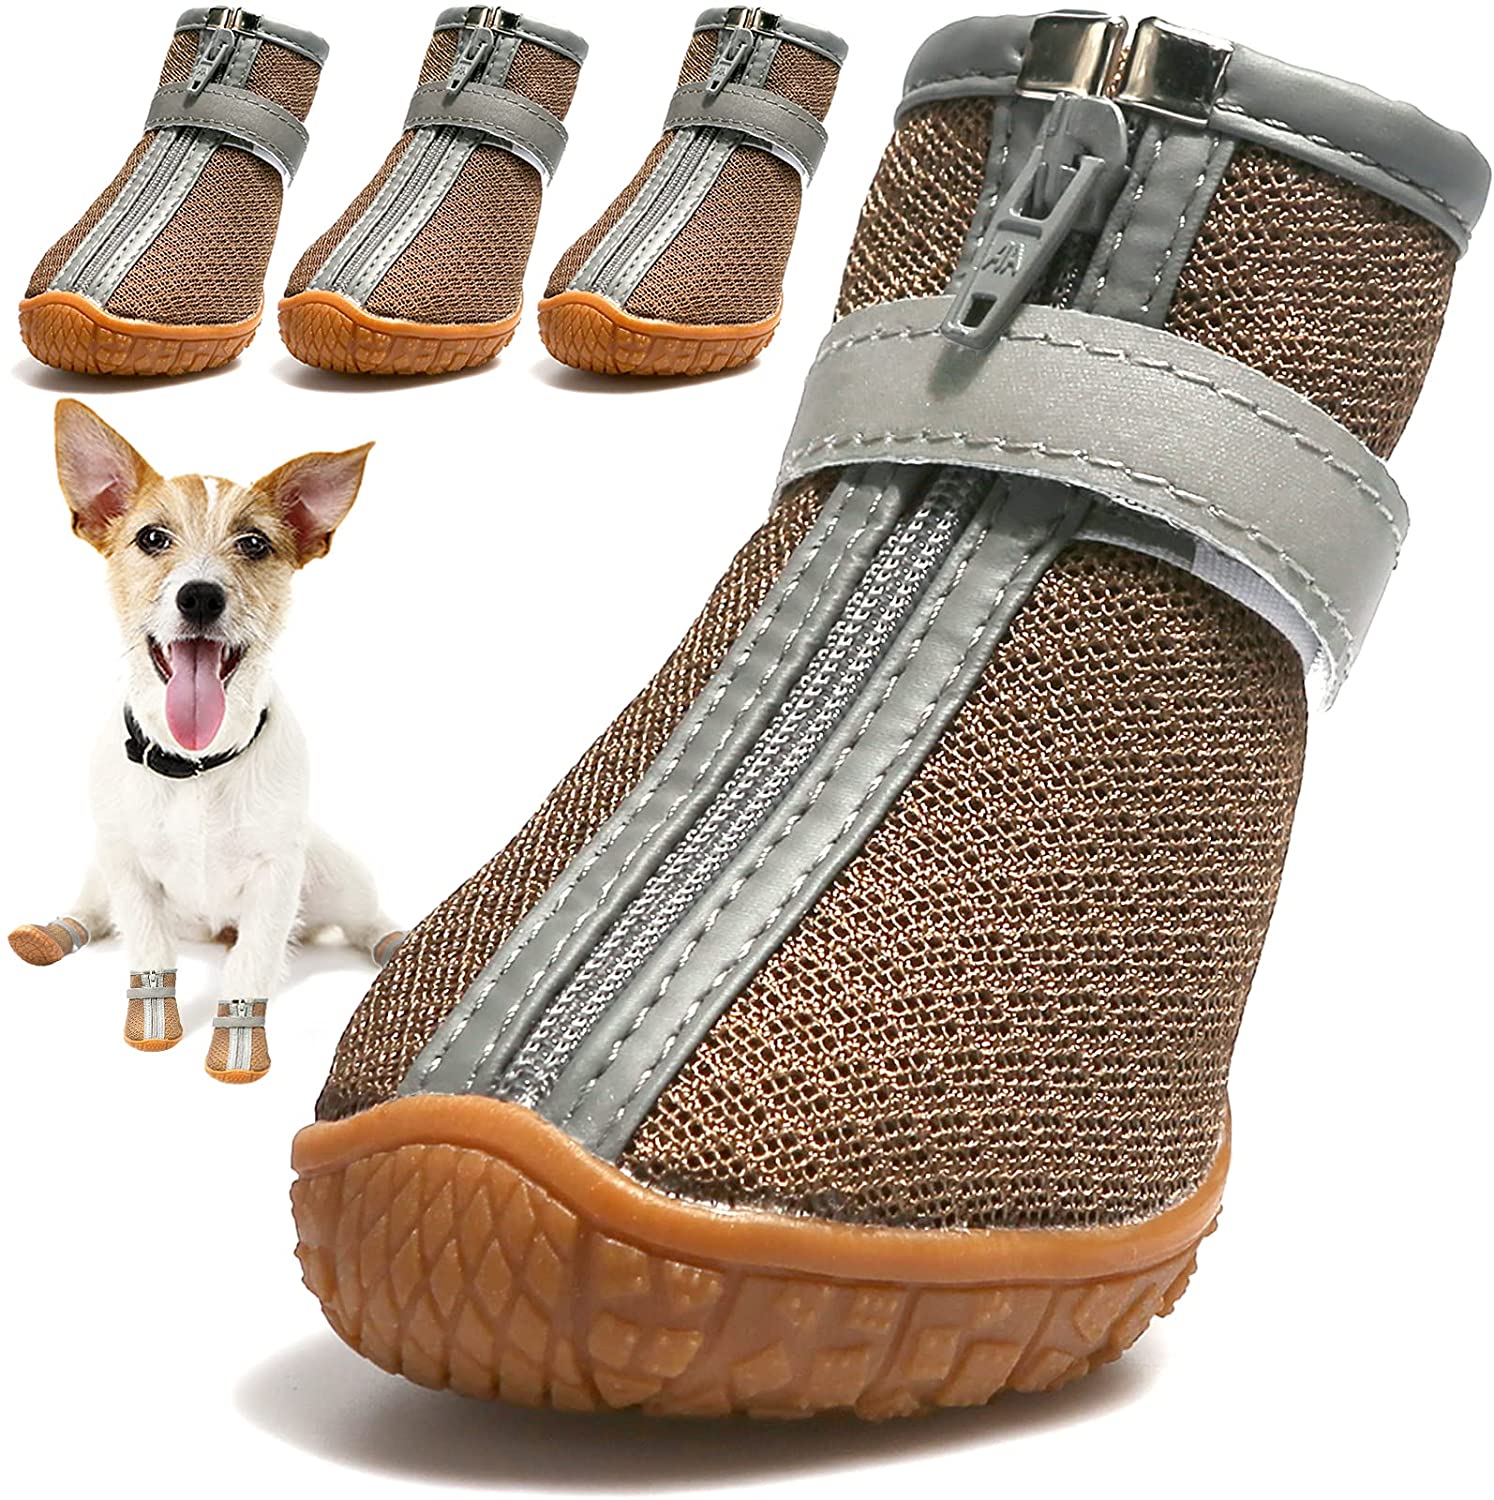 KUTKUT Dog Shoes for Hardwood Floor | Breathable Dog Boots with Anti-Slip Rugged Sole | Summer Dog Booties | Pack of 4pcs Dog Hiking Boots with Reflective & Adjustable Strap Zipper Closure fo